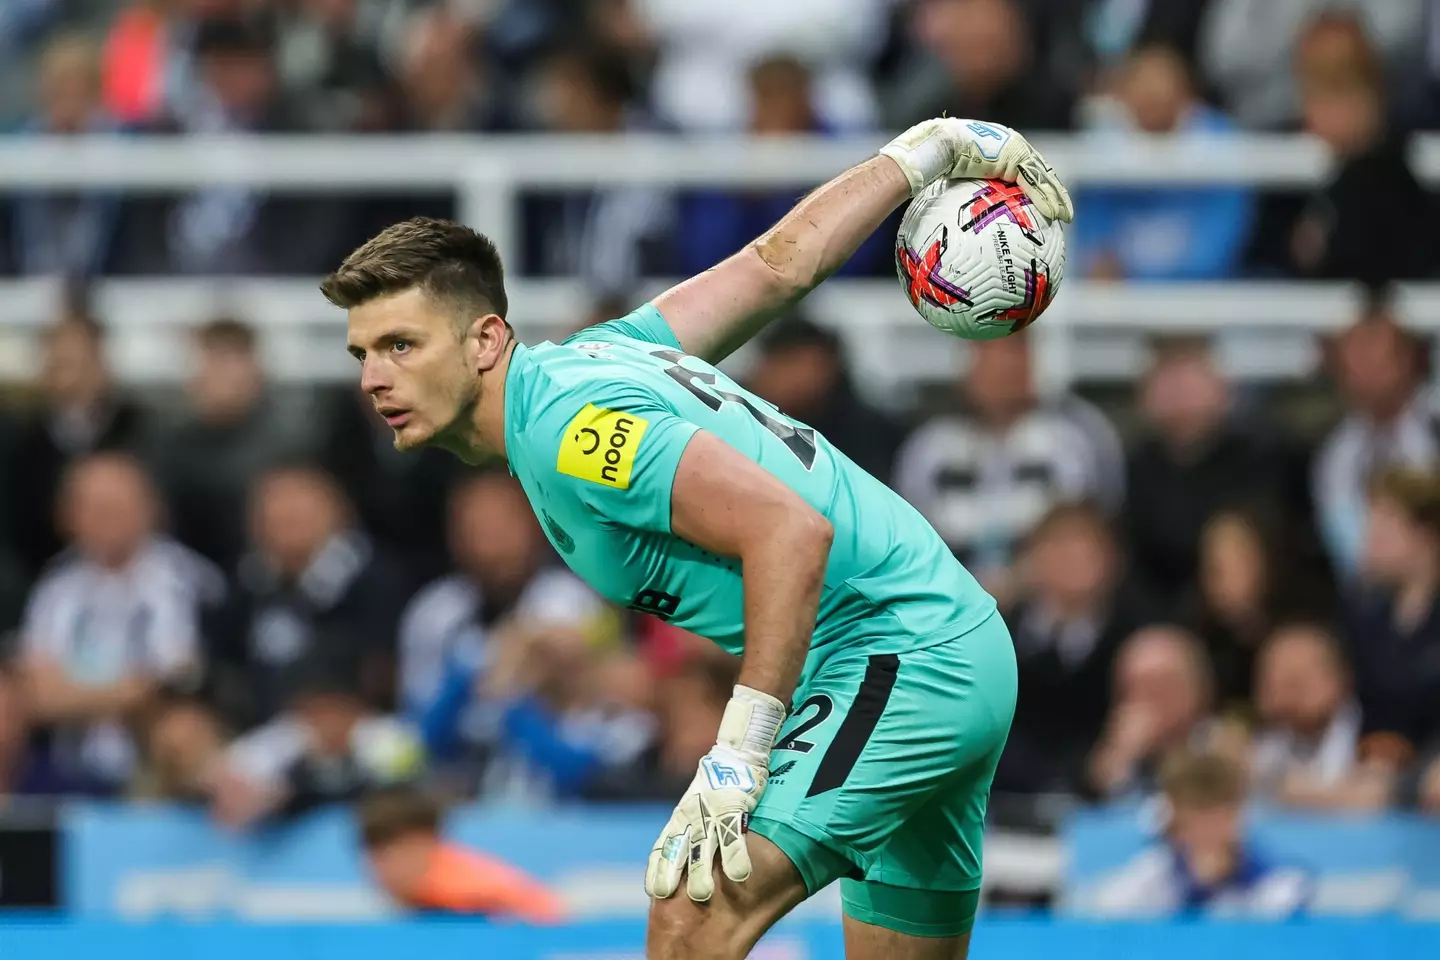 Newcastle goalkeeper Nick Pope pictured (